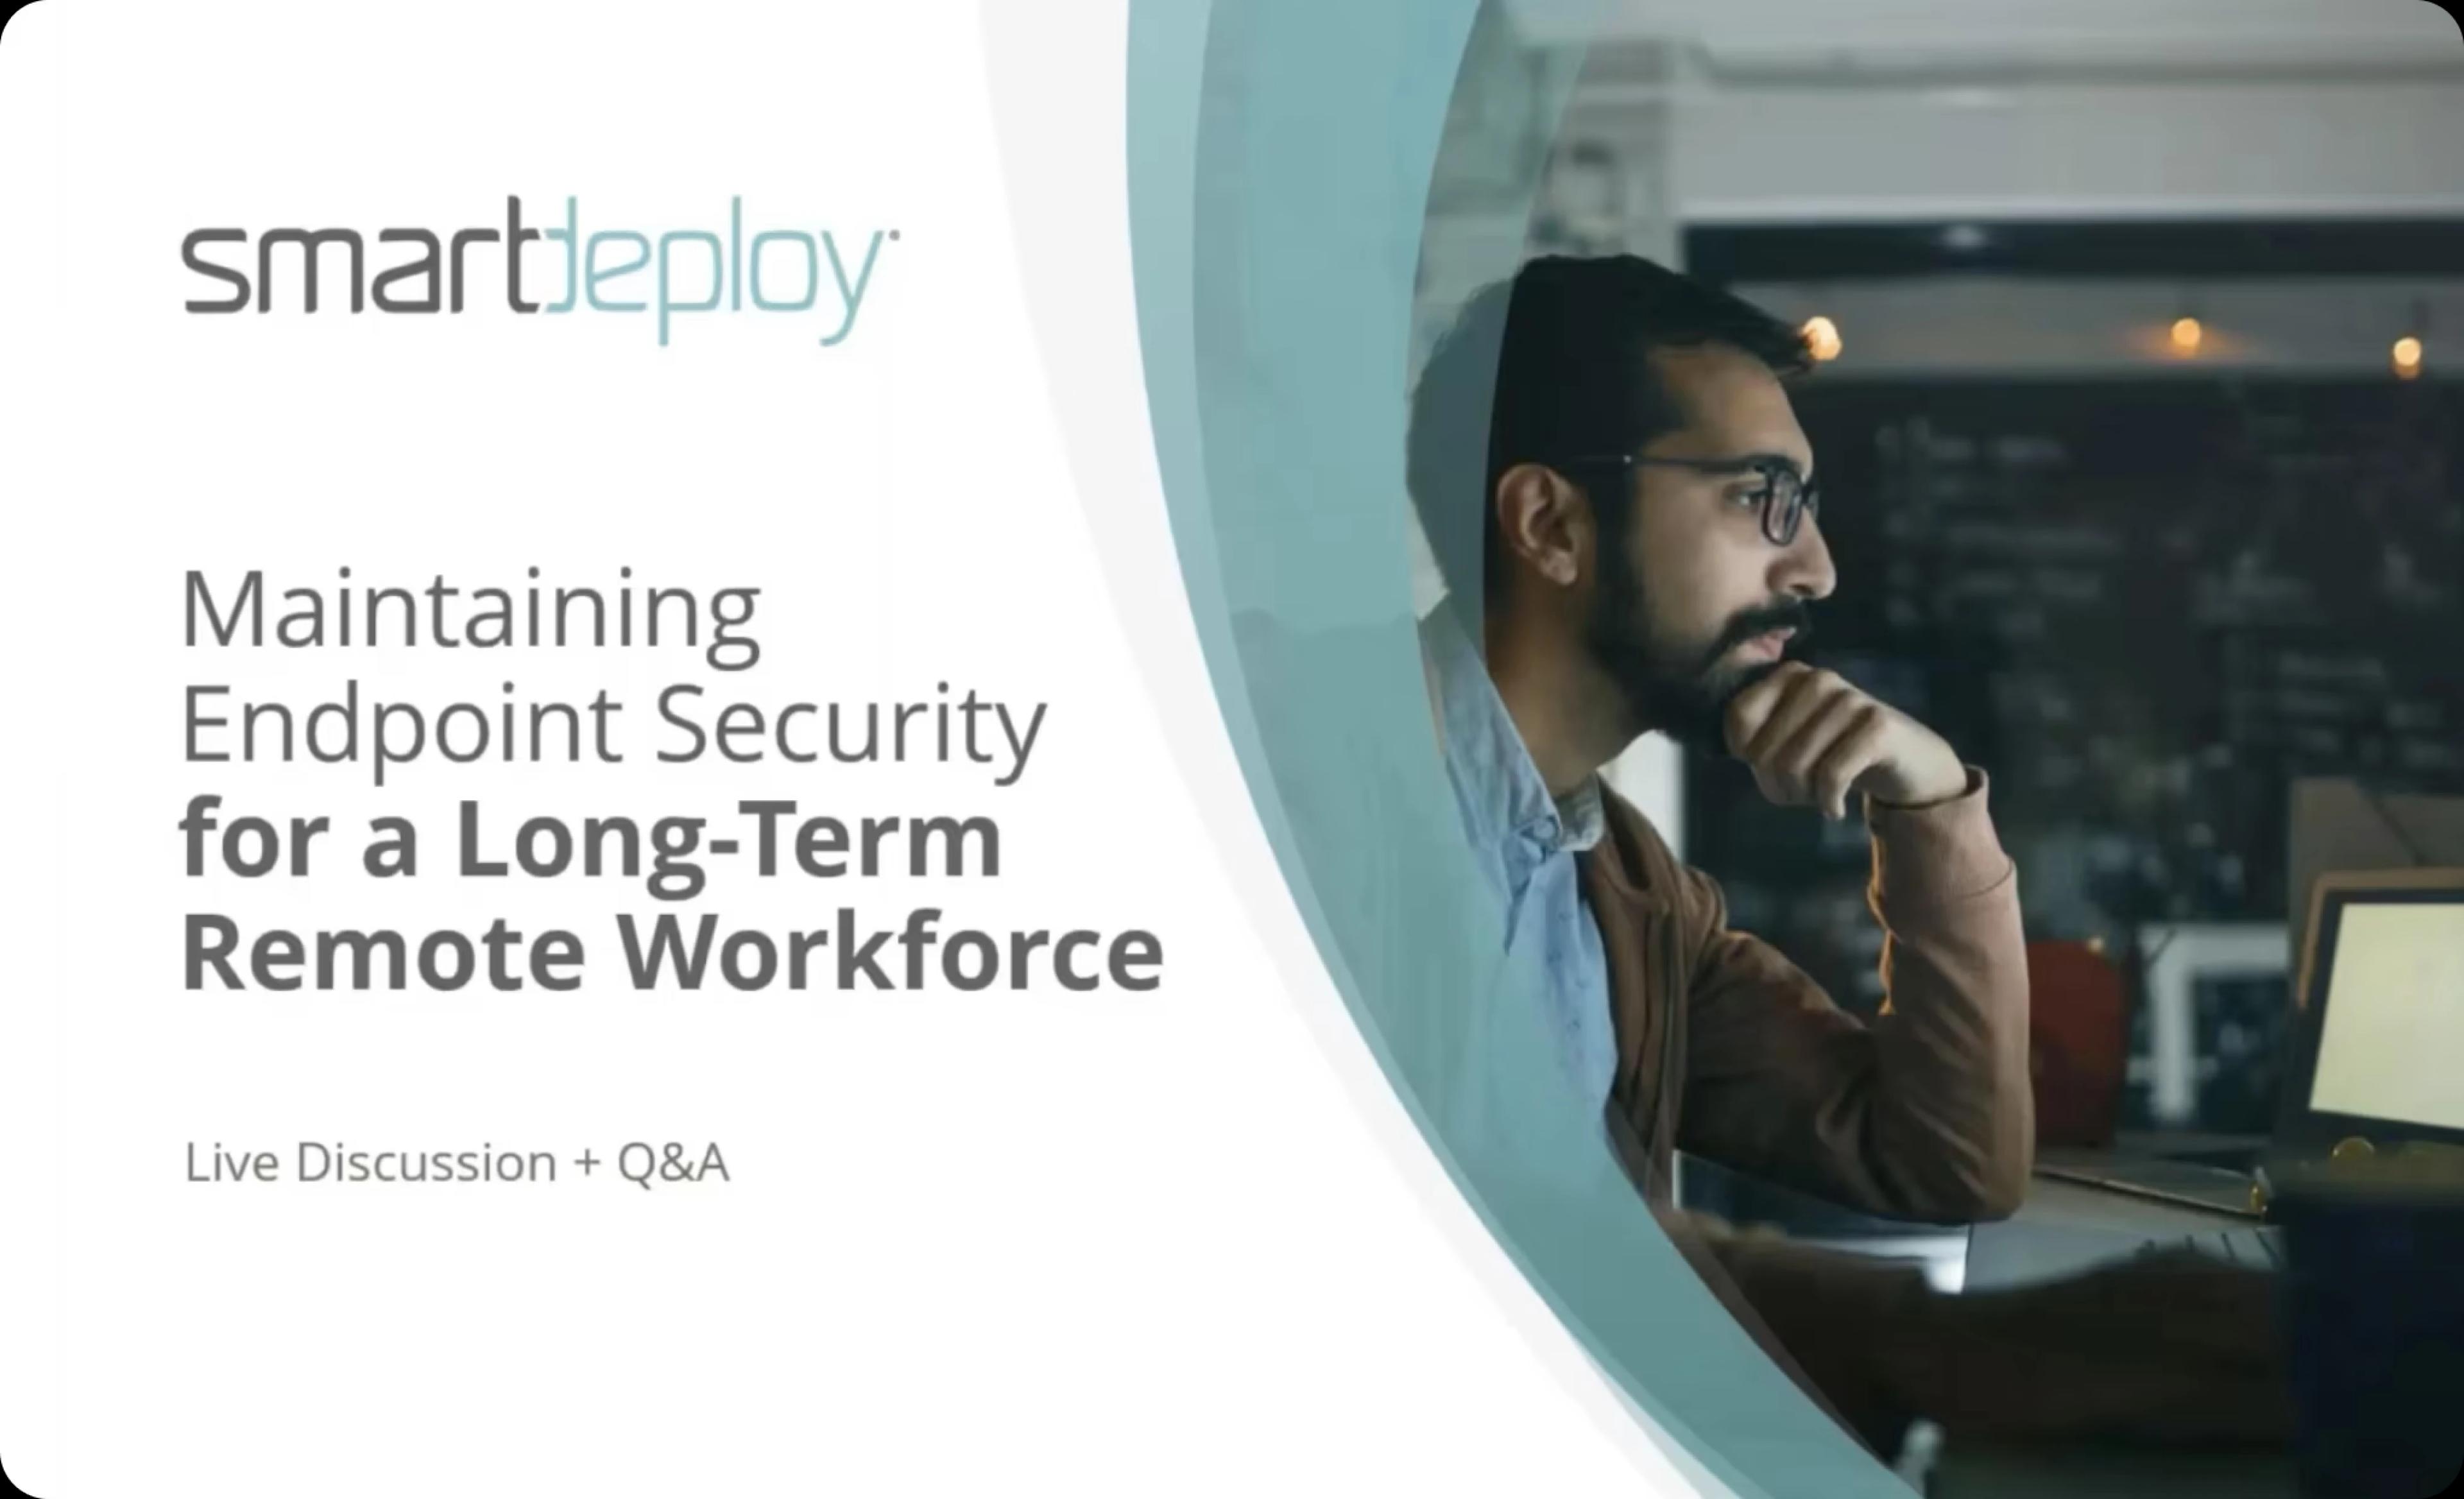 Maintaining endpoint security for remote work